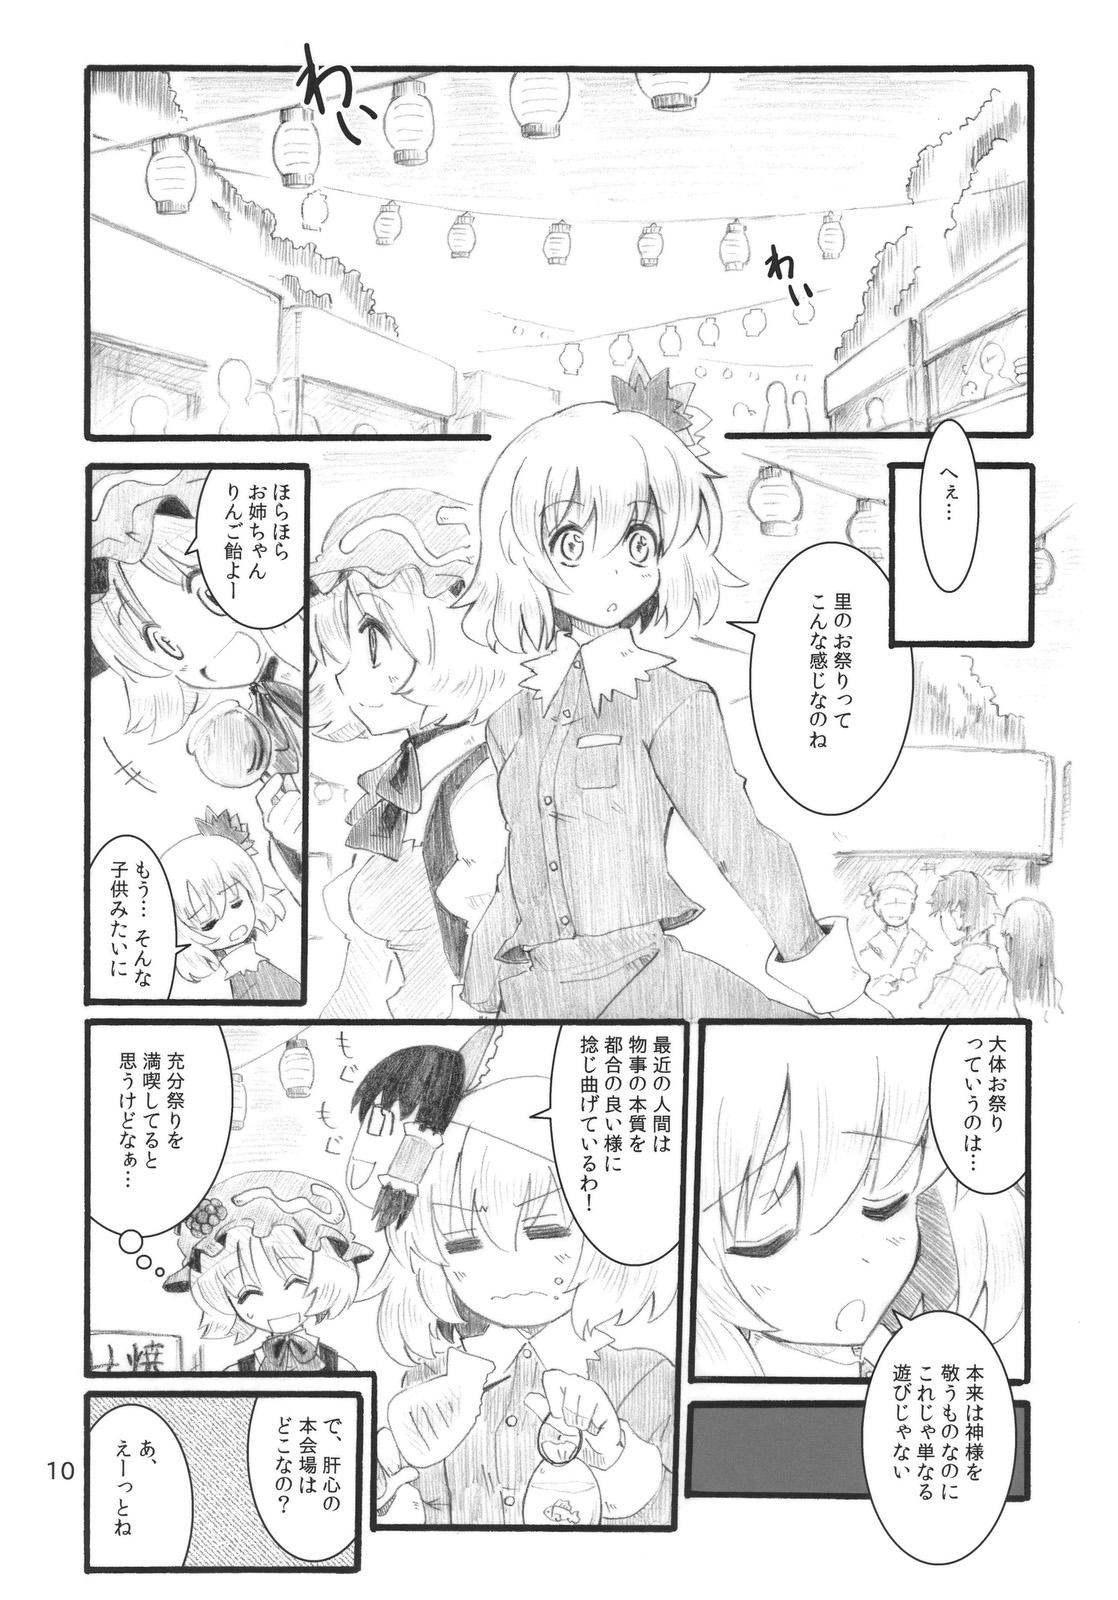 Perrito Autumn Leaves - Touhou project Hood - Page 10